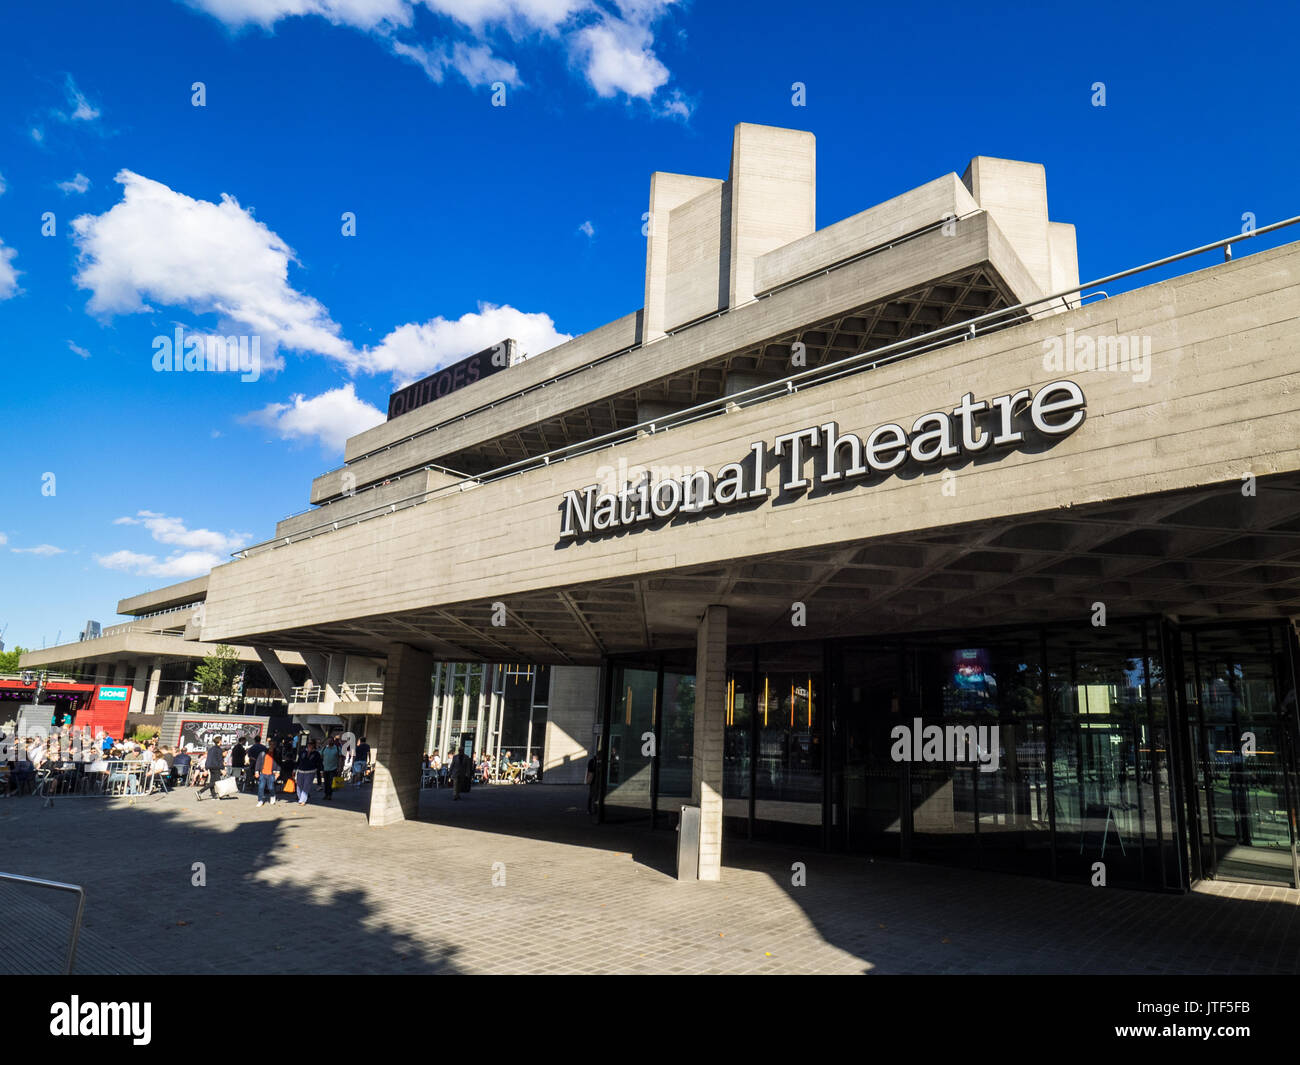 National Theatre Soutbank London - The National Theatre on London's Southbank on a sunny summer afternoon. Stock Photo